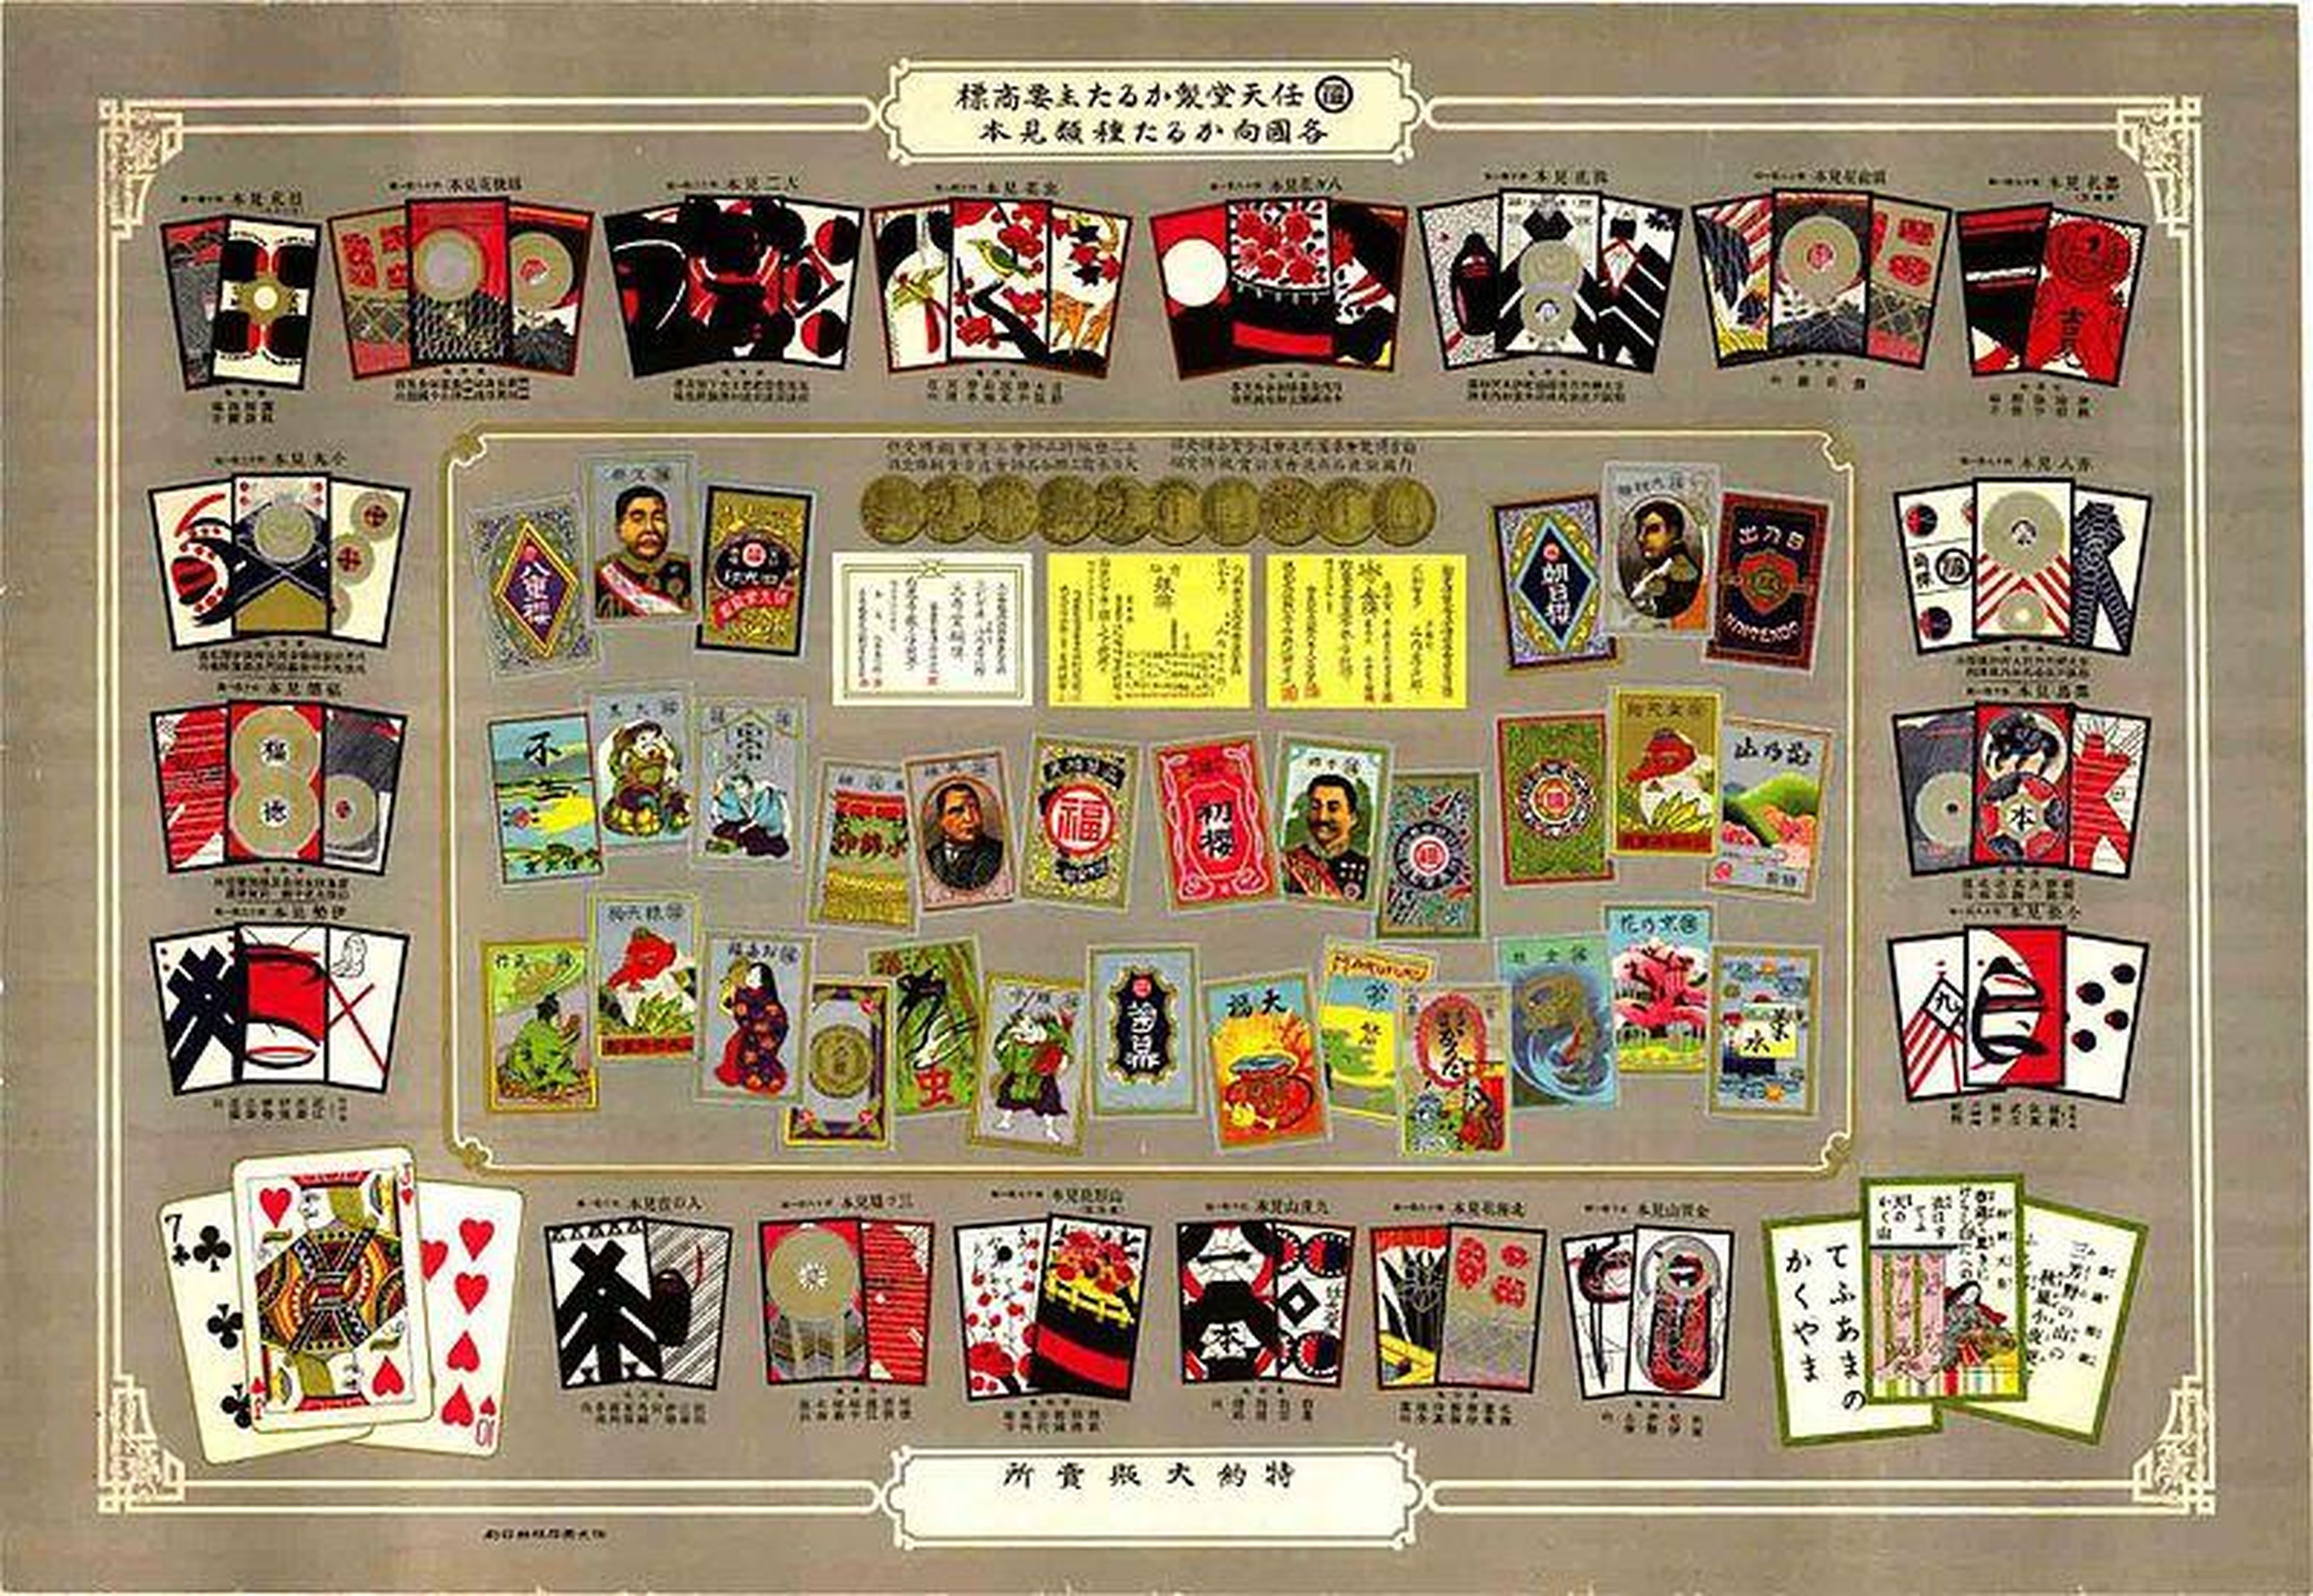 Over the next four decades, the cards were so popular in Japan that the company became the largest card-selling business in the country, eventually creating “durable plastic-coated playing cards” with Disney characters on them,